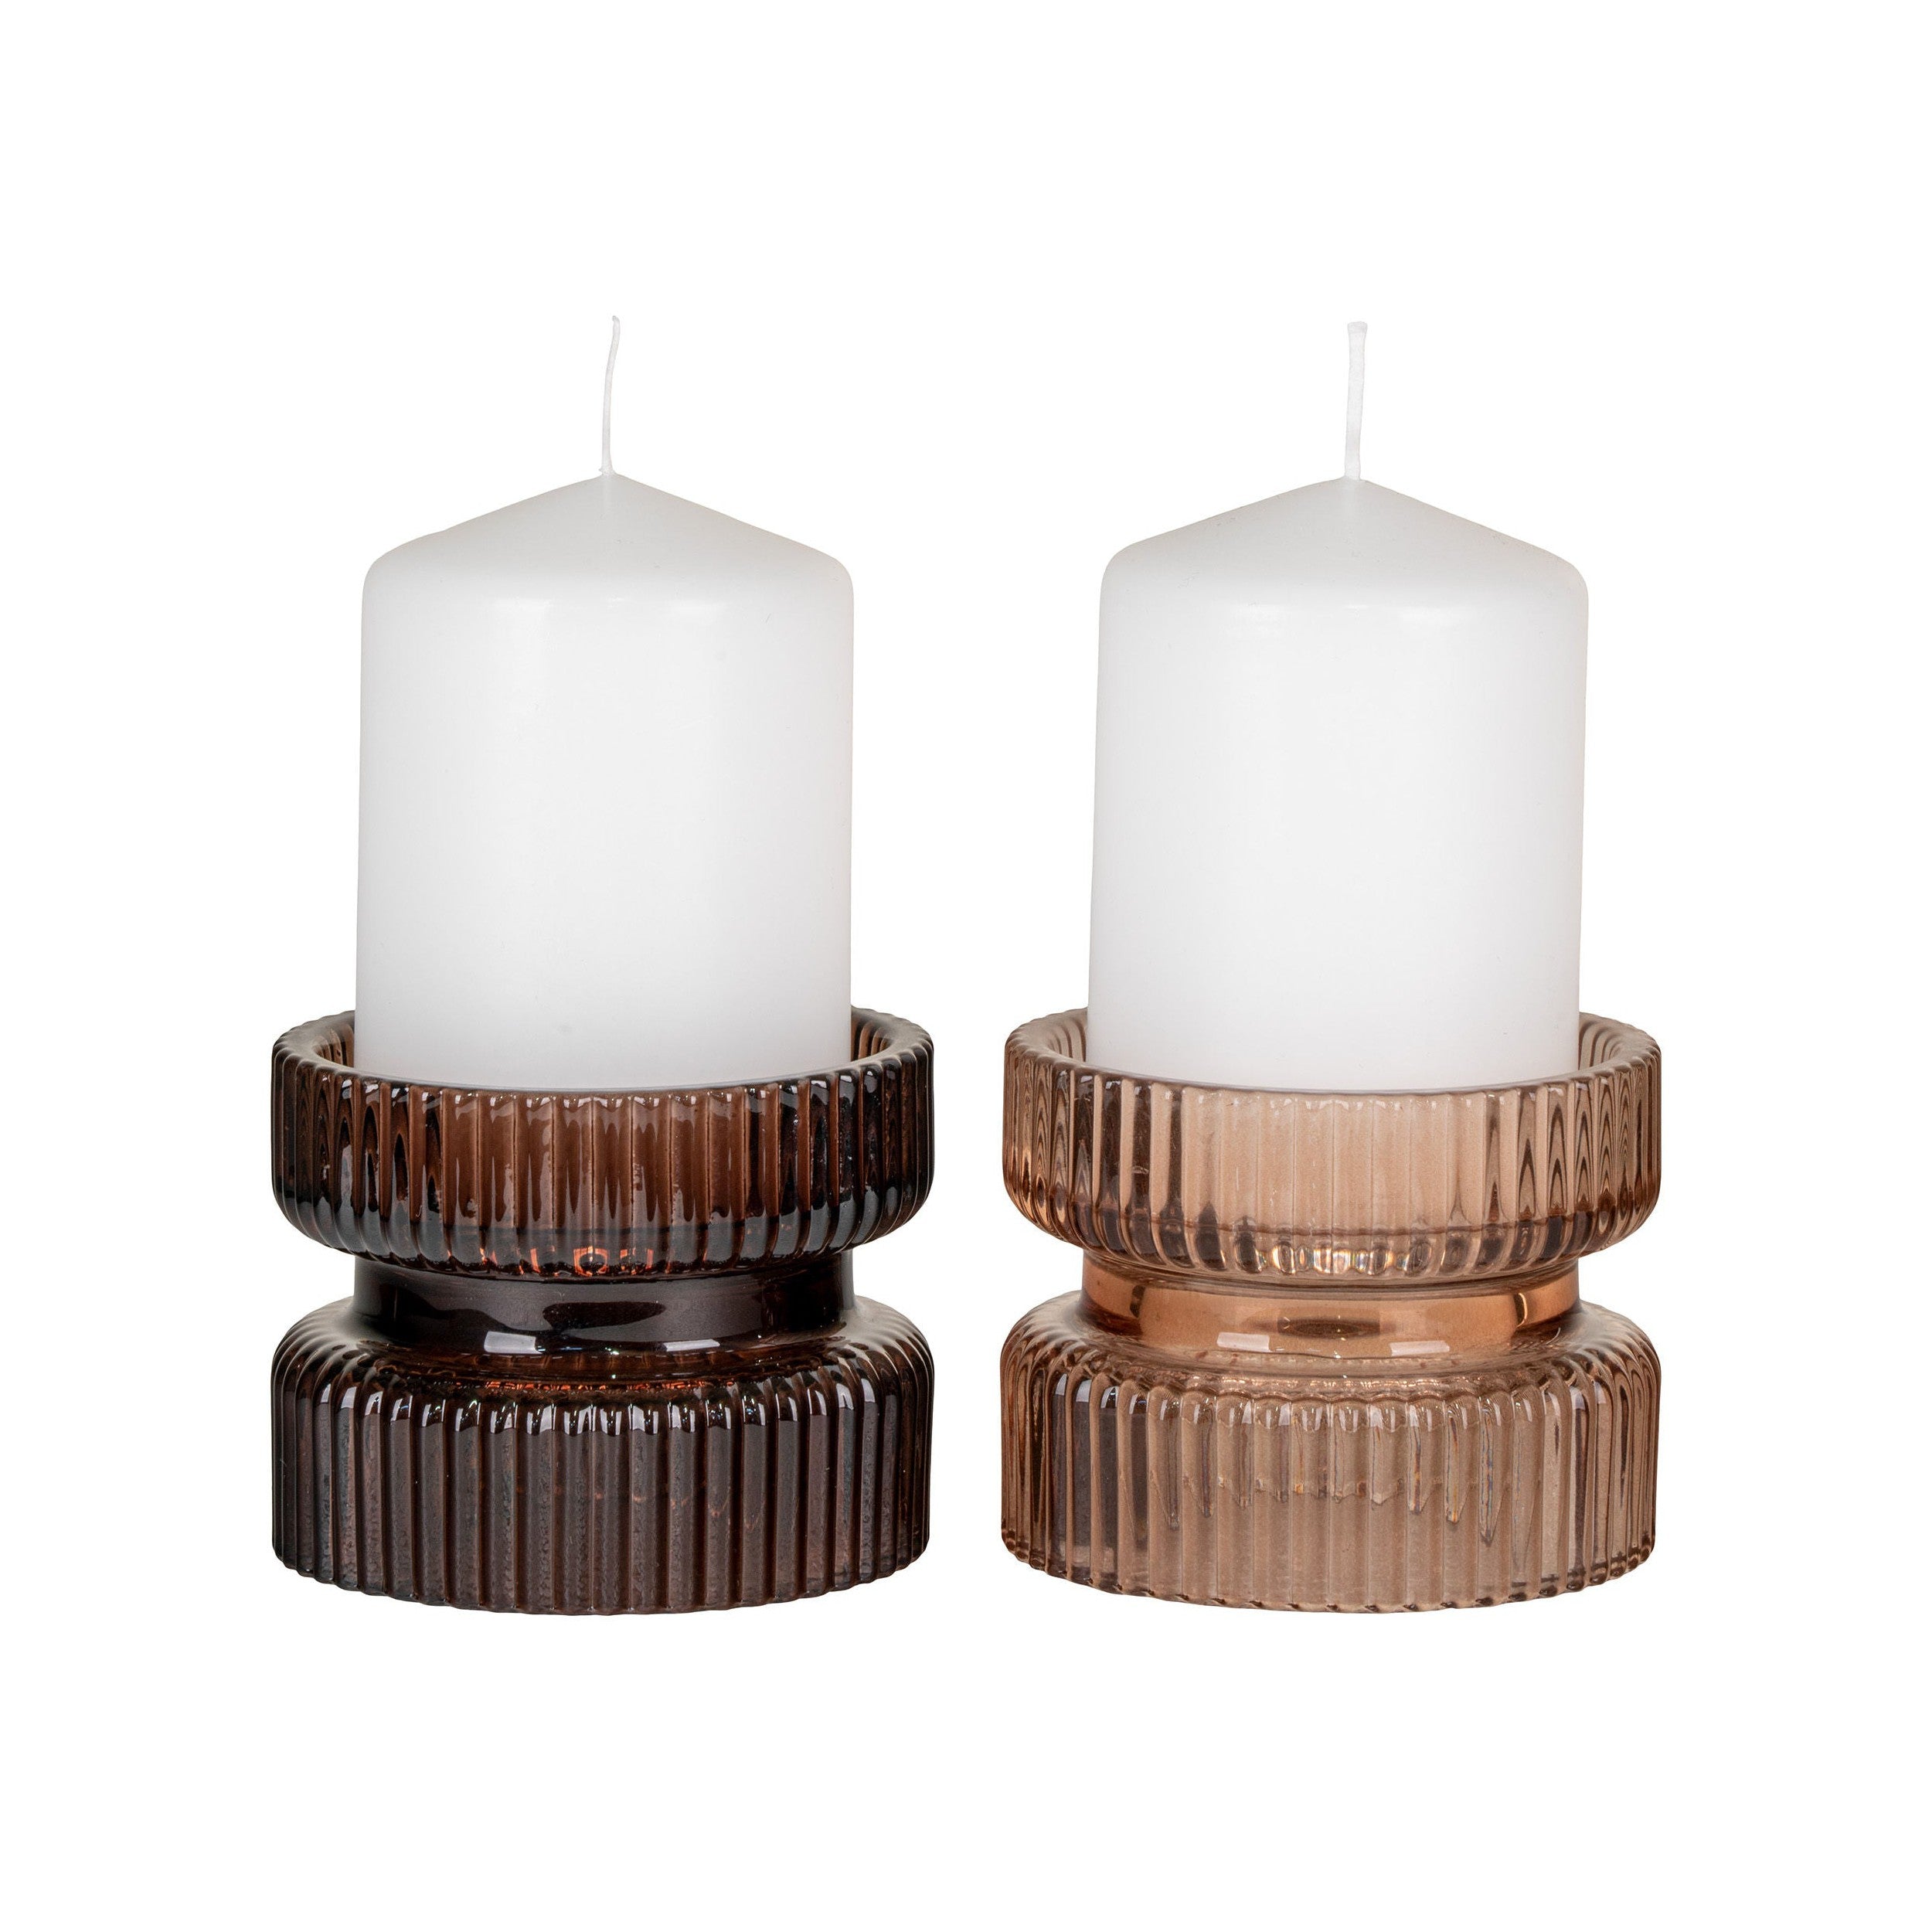 House Nordic Candle Holder, set of 2